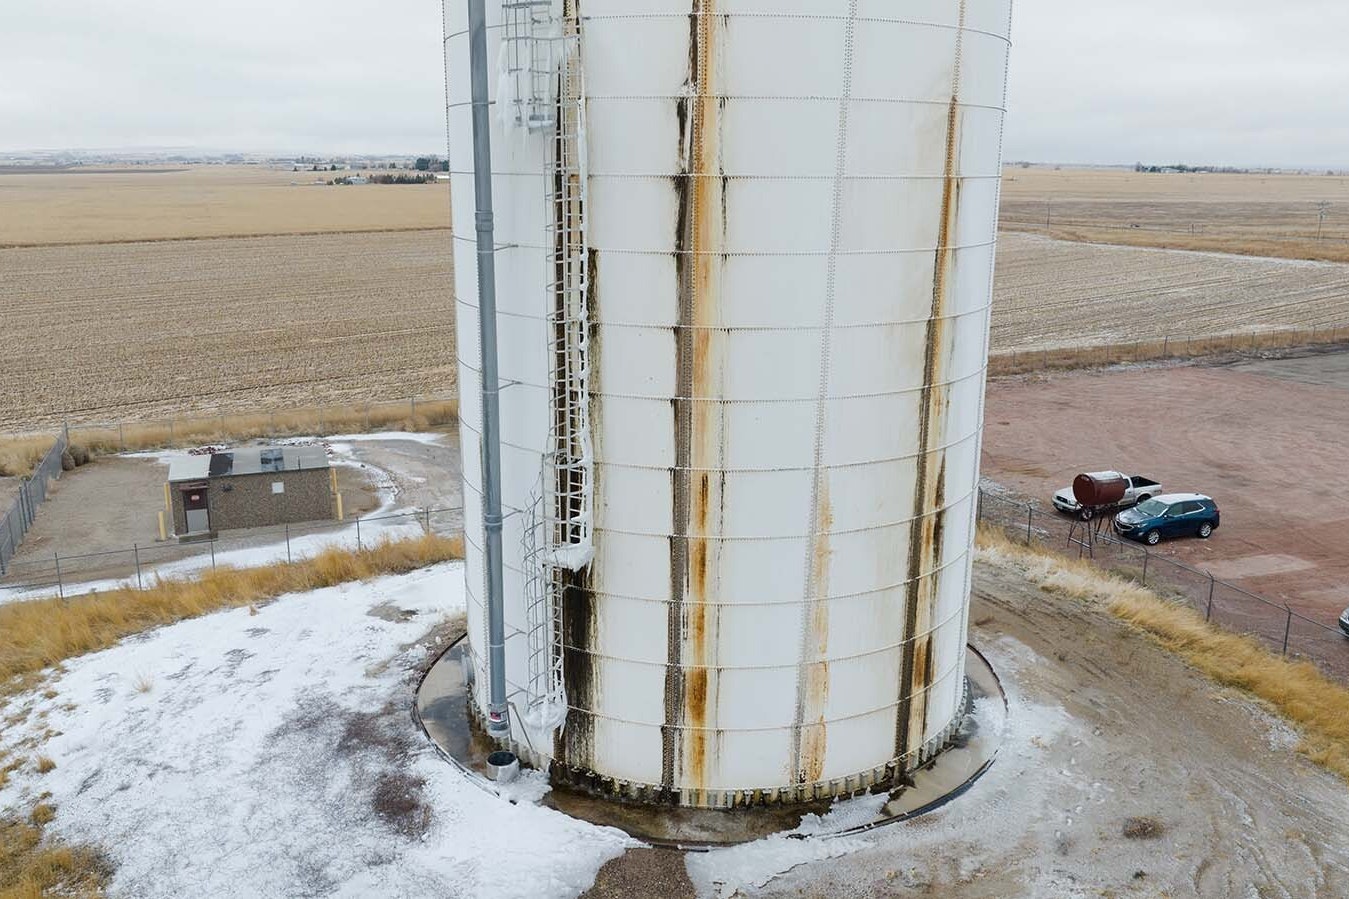 Although this water tower built in 2001 was supposed to have a life expectancy of 50 years, it's badly leaking and close to failing.